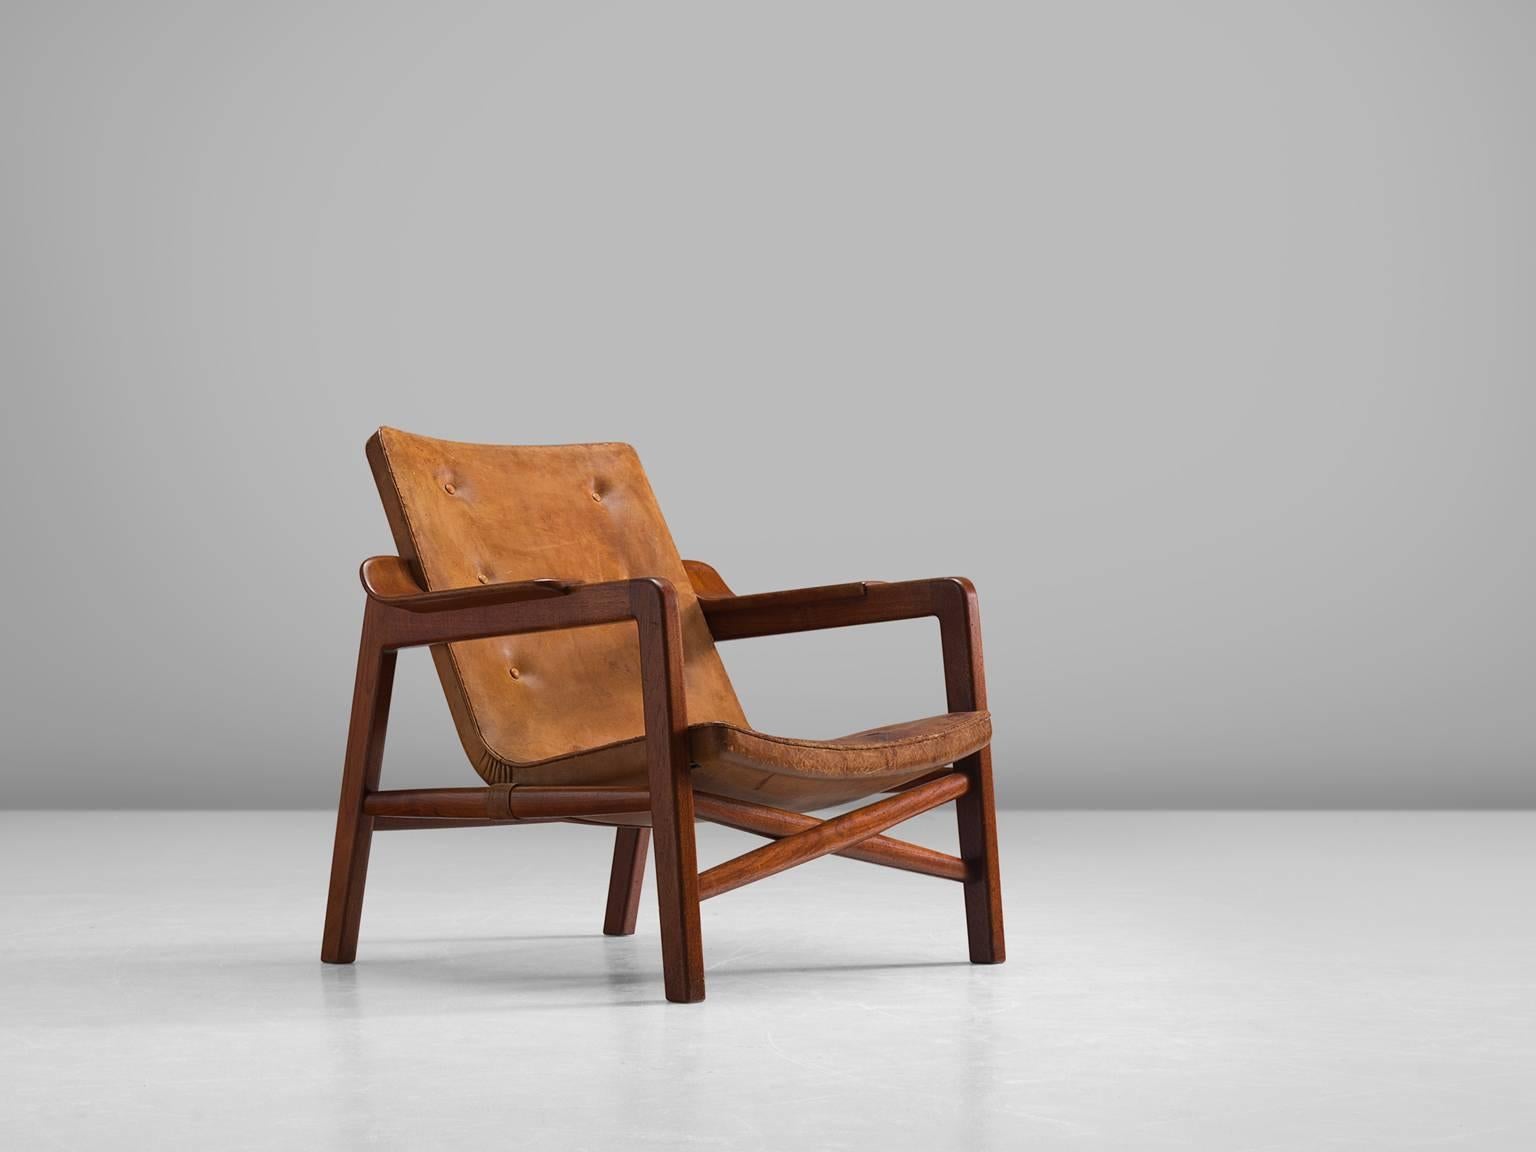 Tove & Edvard Kindt-Larsen for Gustav Bertelsen, 'Fireplace' chair, in teak and leather, Denmark, 1939.

This lounge chair was specially designed to sit in front of a fireplace. When it was first exhibited, this model was mentioned as a